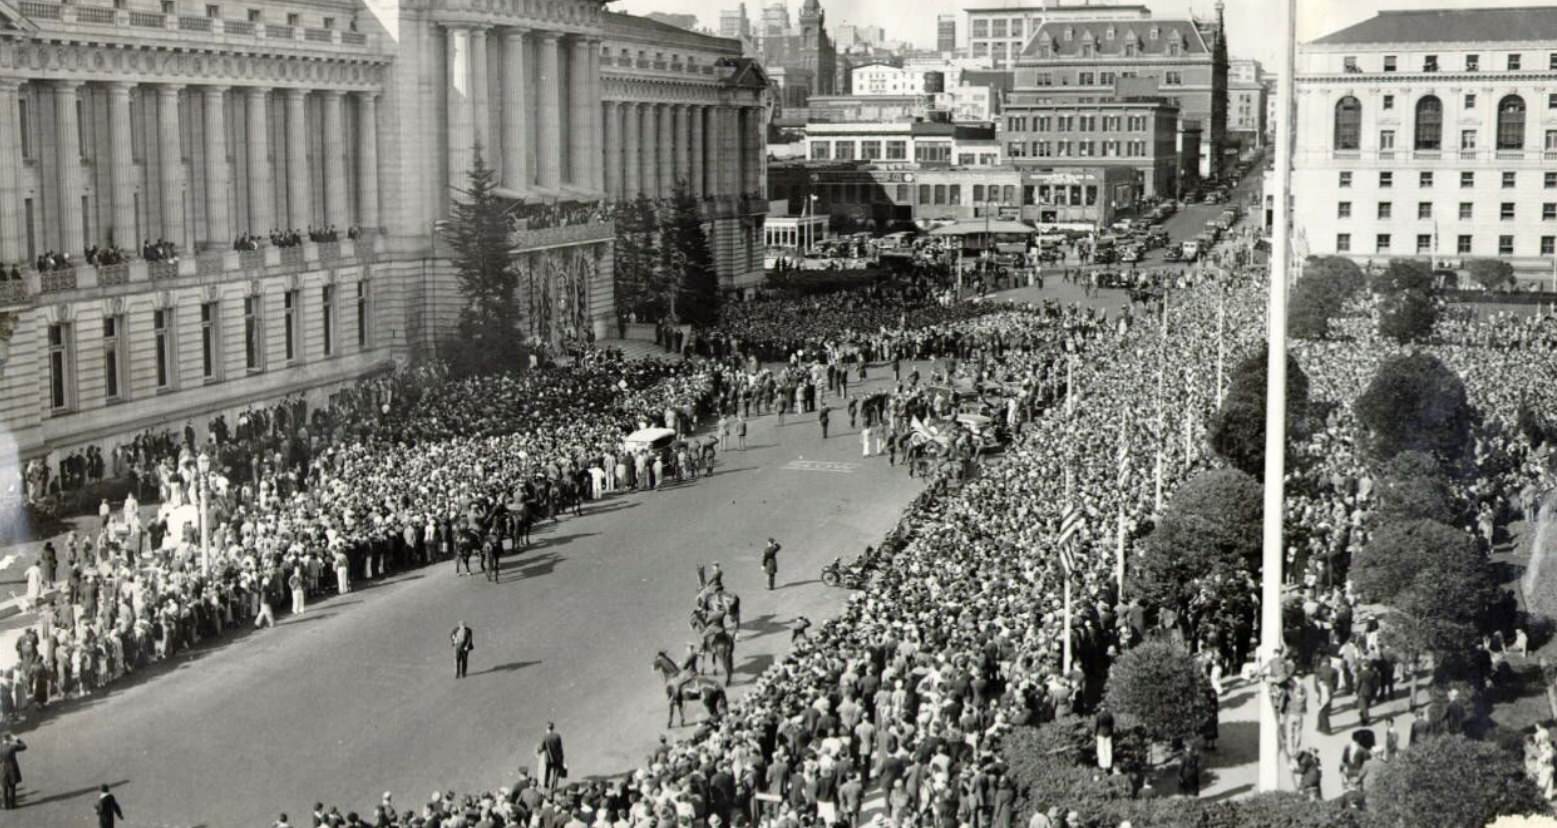 Large crowd of people gathering in front of City Hall in the Civic Center, 1932